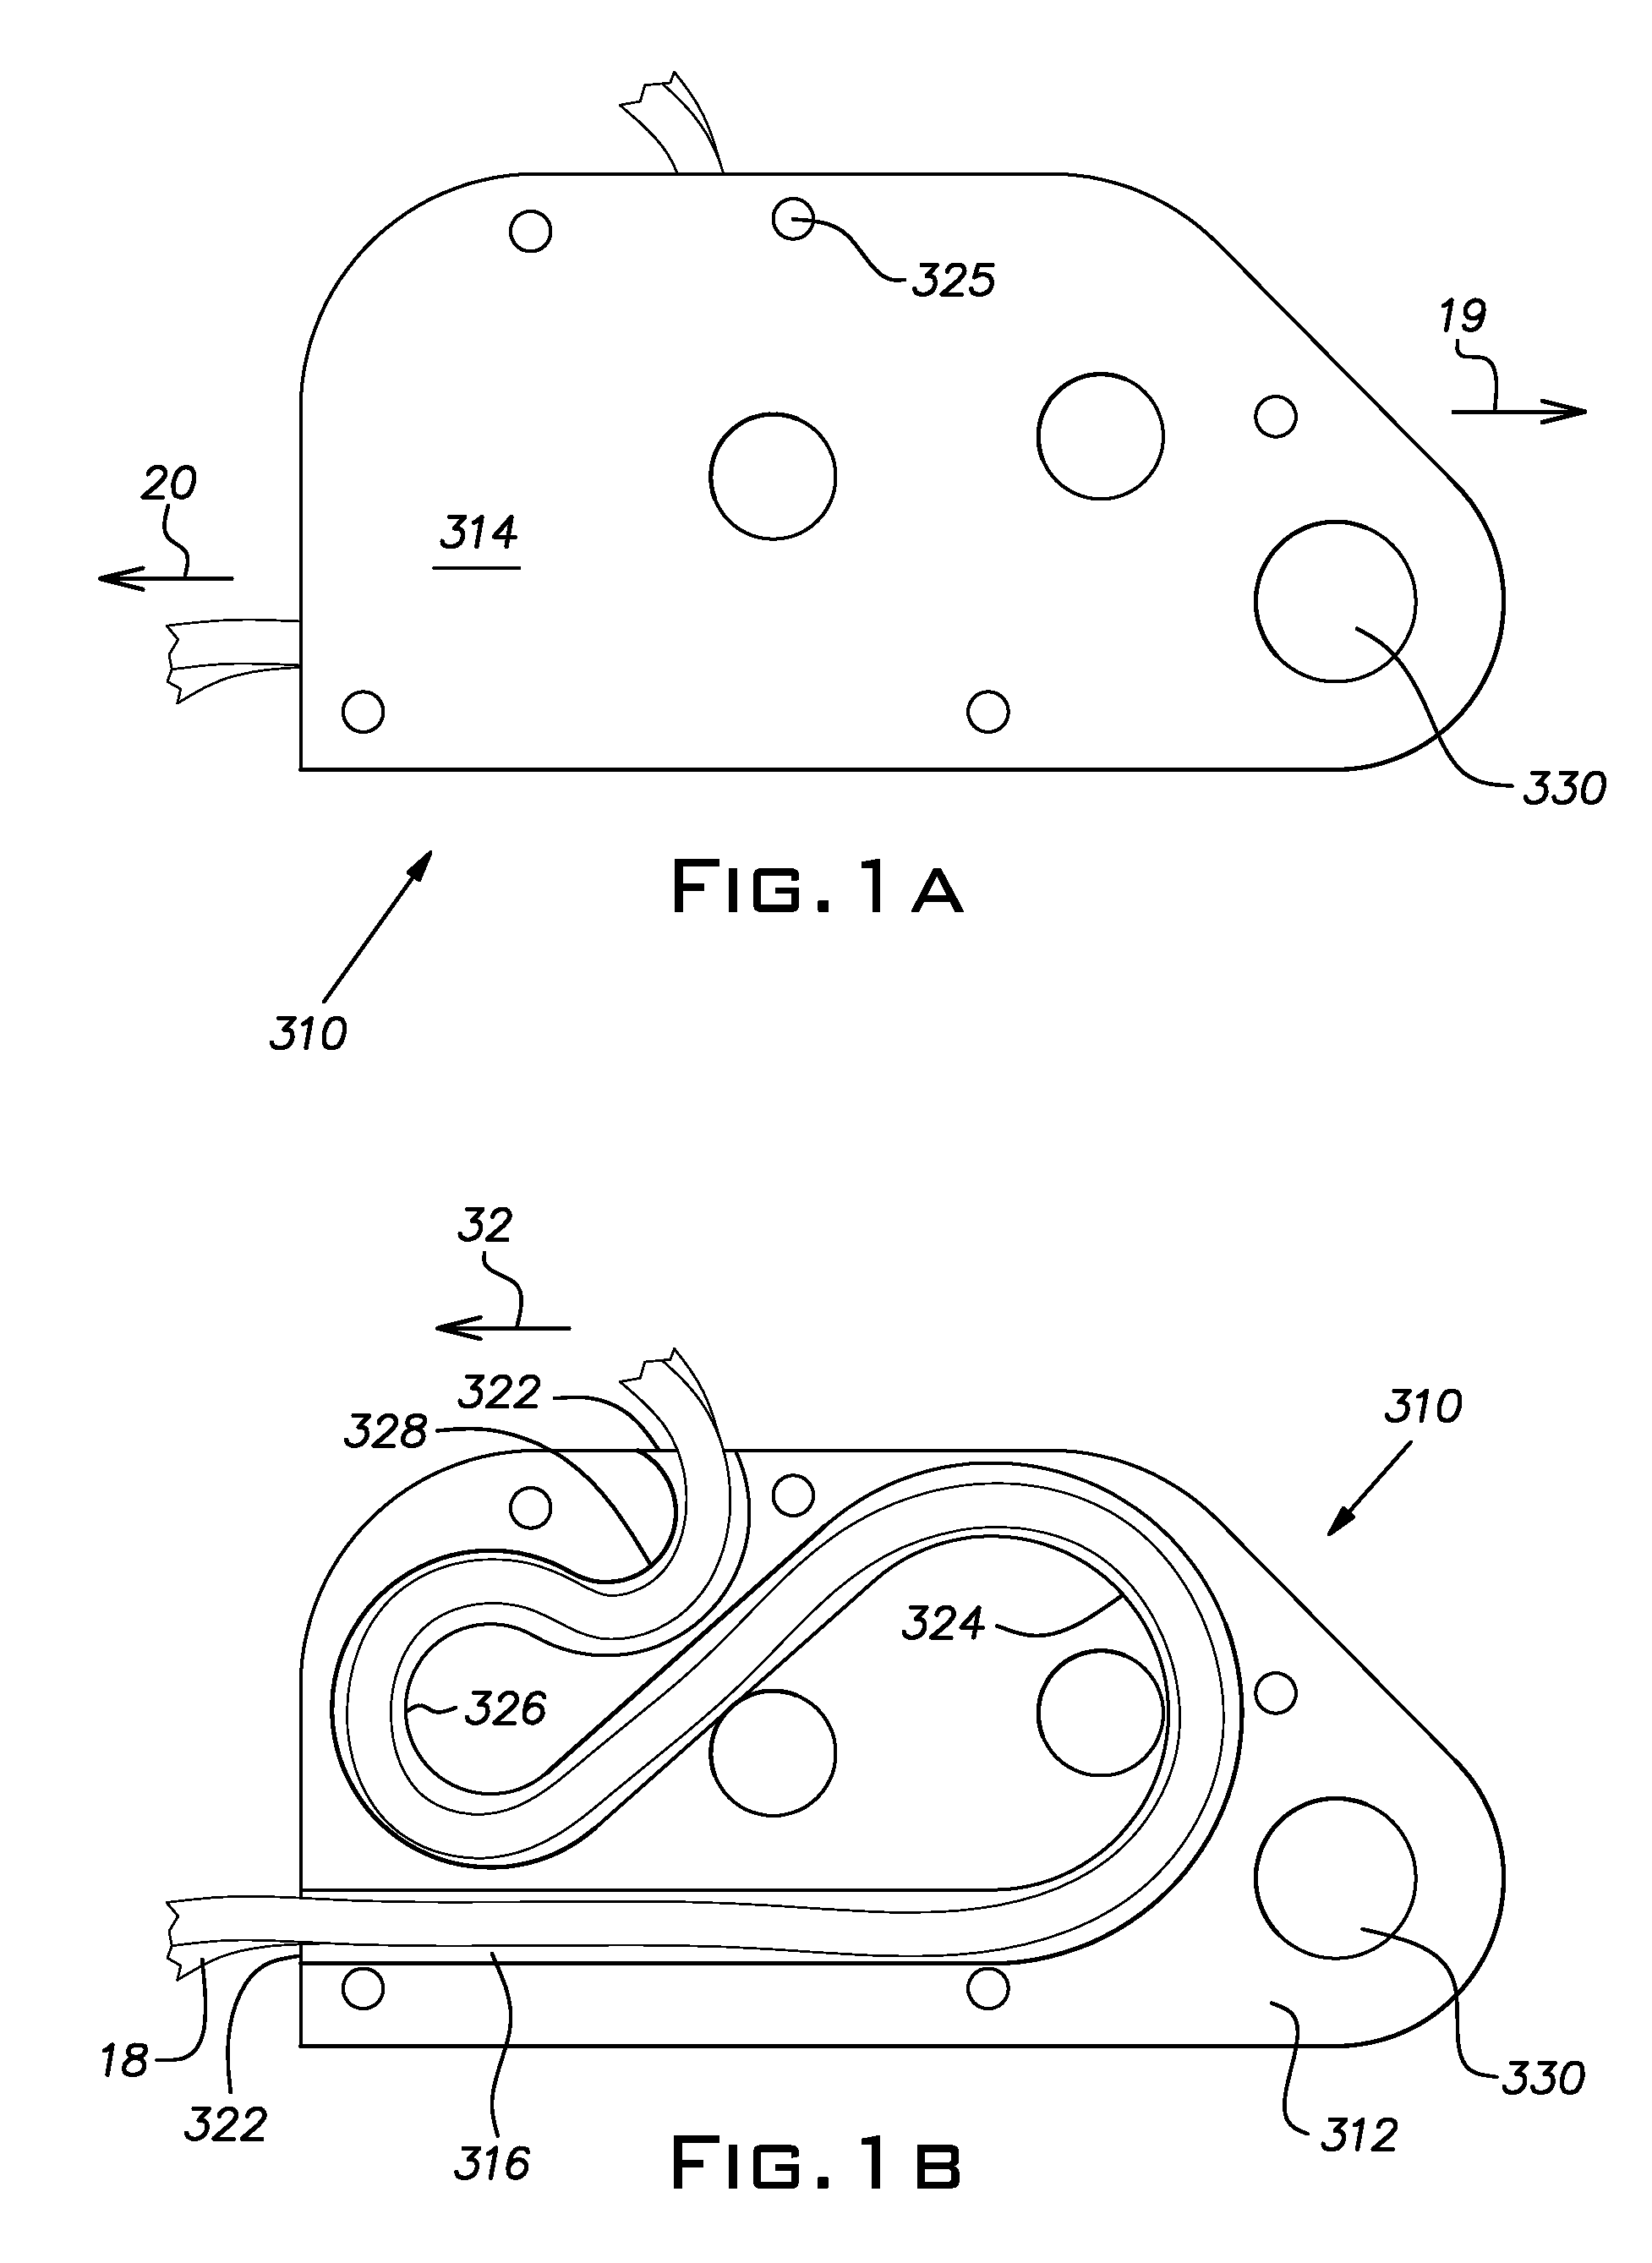 Descending device and method of use